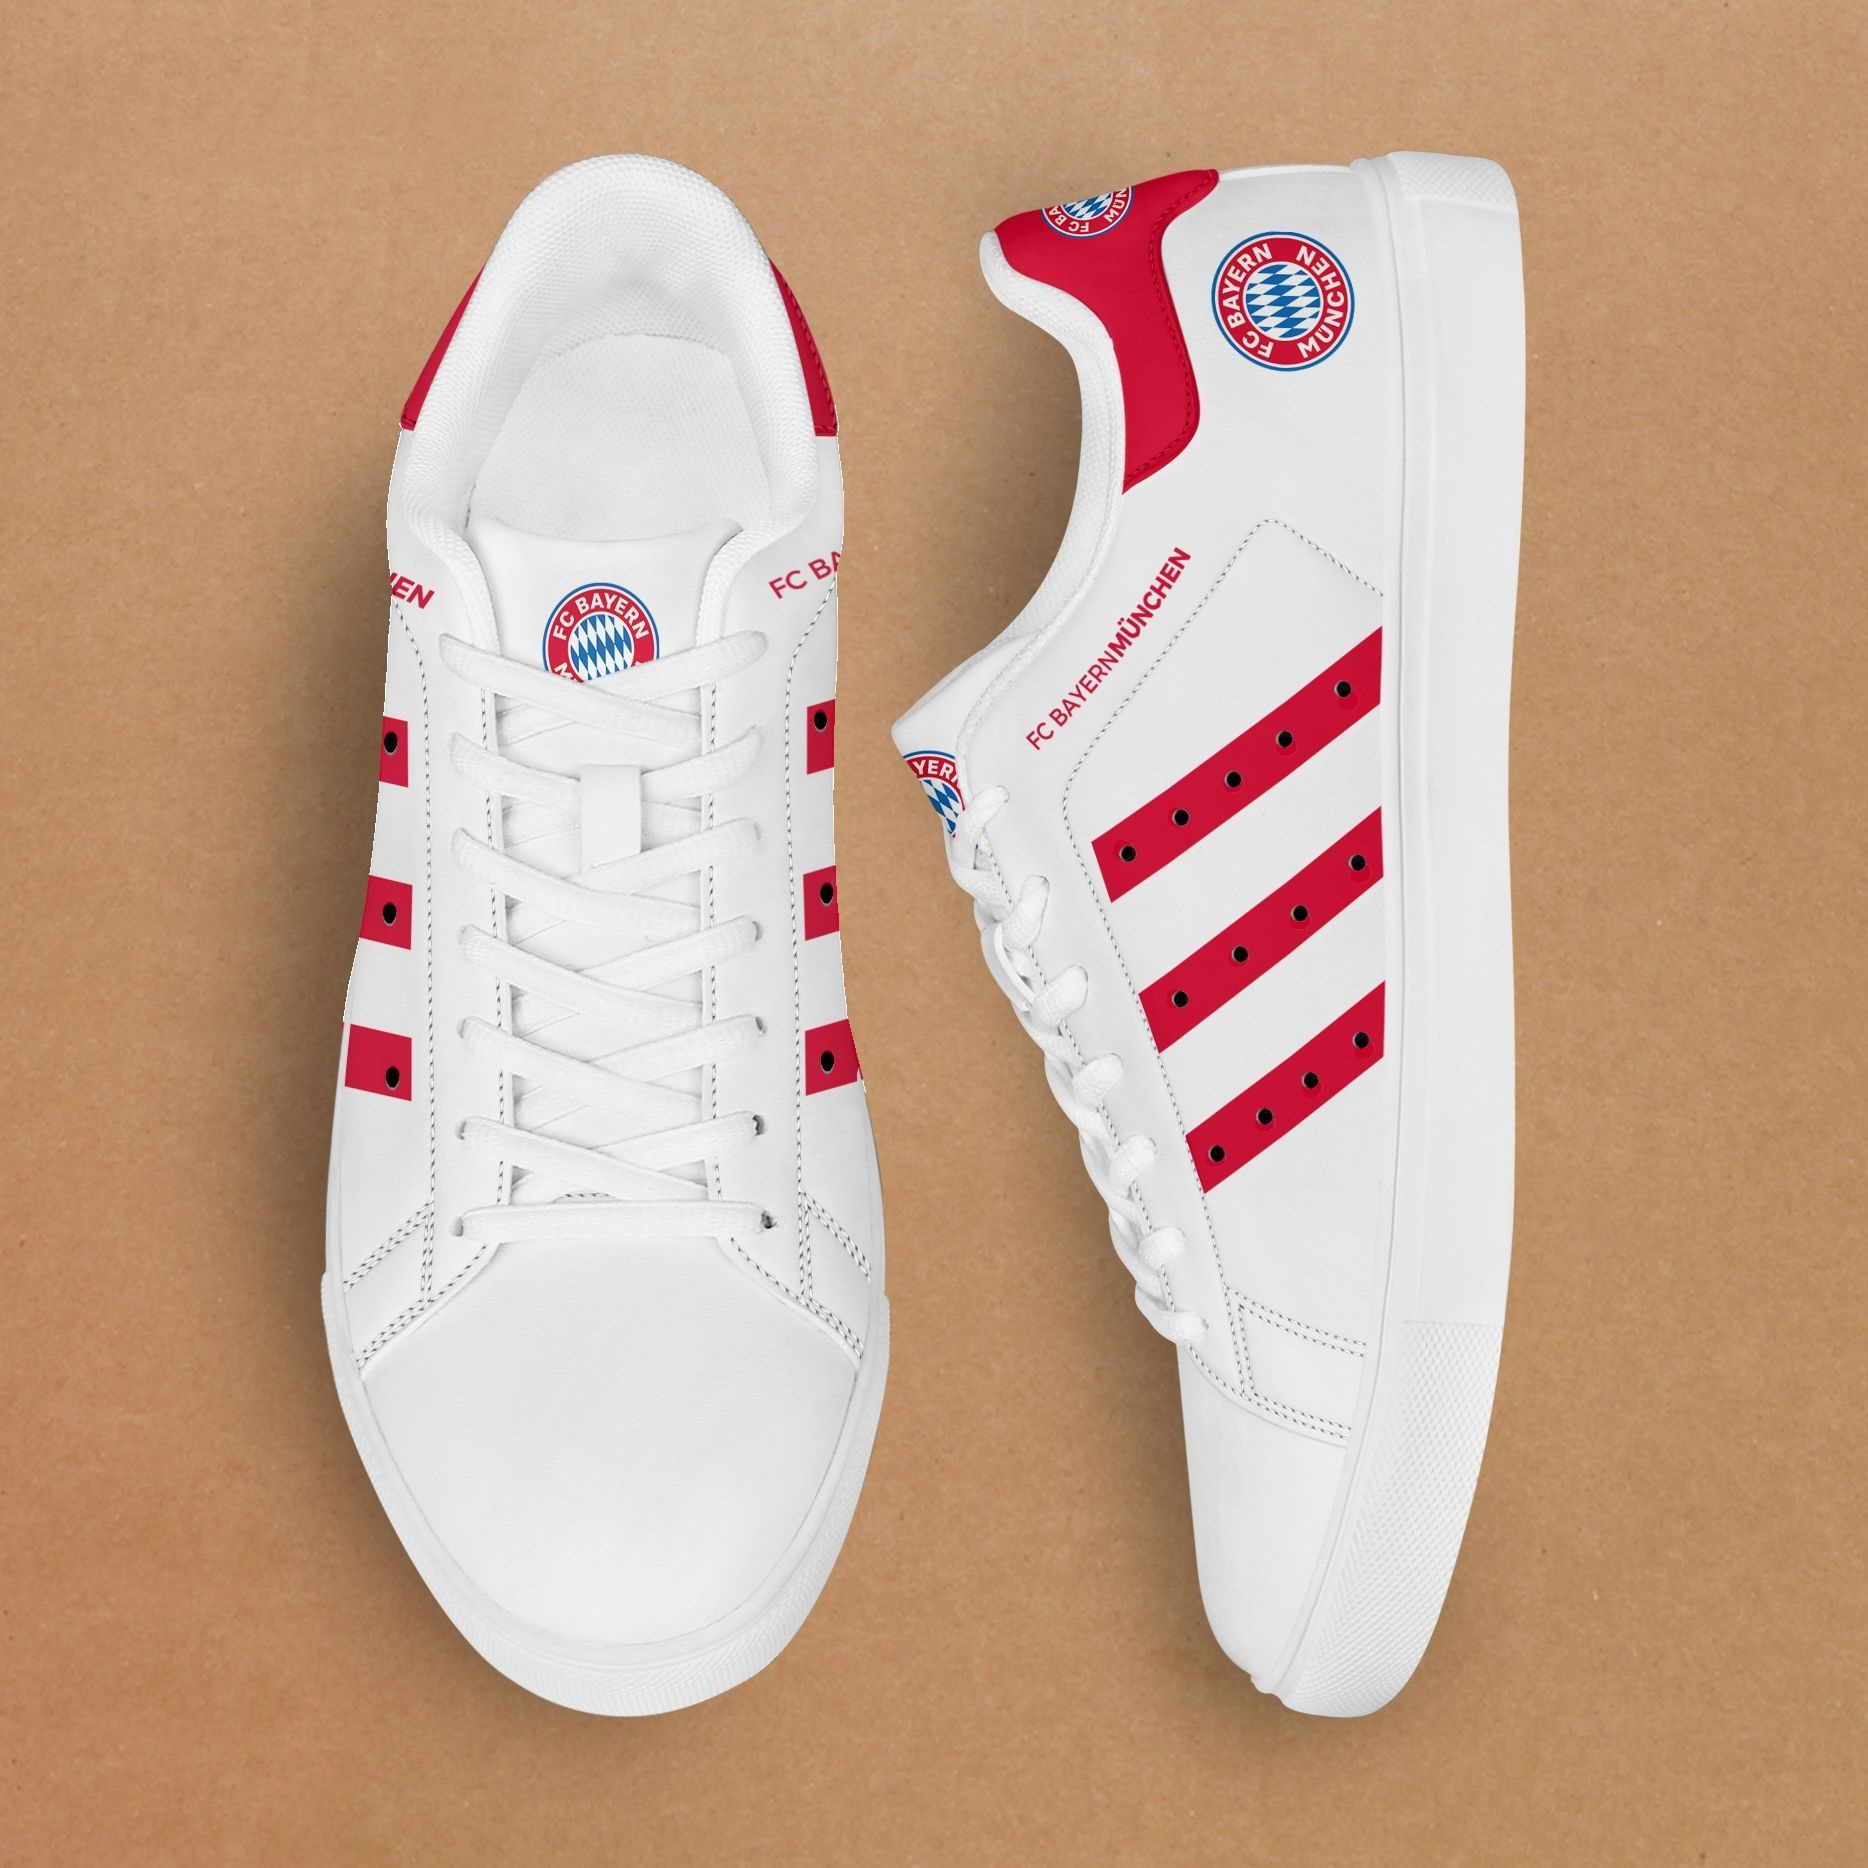 Bayern Munchen stan smith shoes - Picture 3